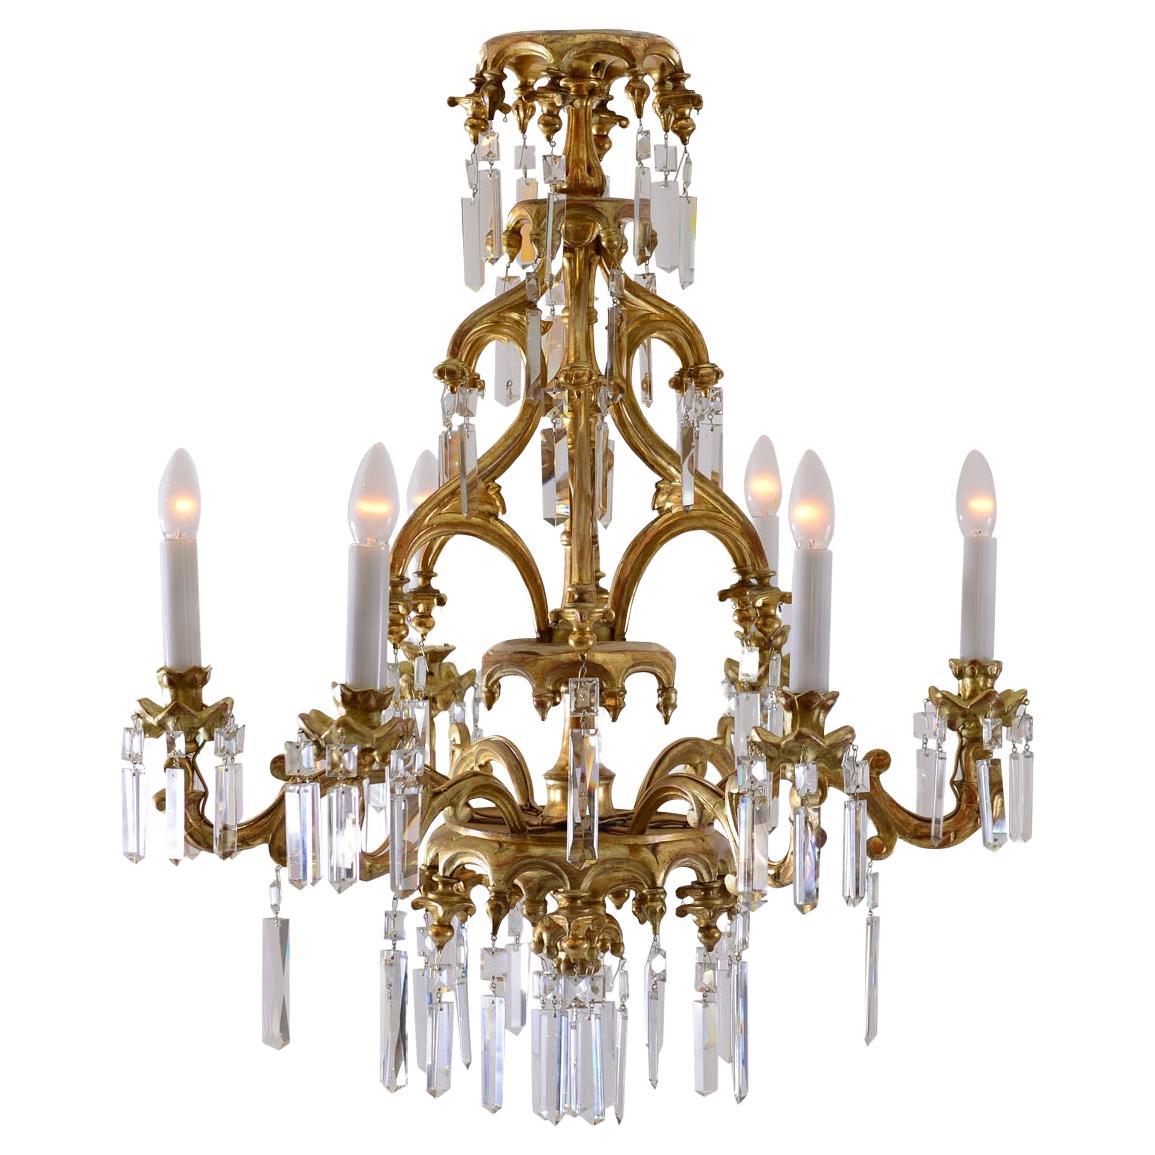 Original Historistic Limewood Chandelier, Laxenburger Gothic Style, 19th Century For Sale